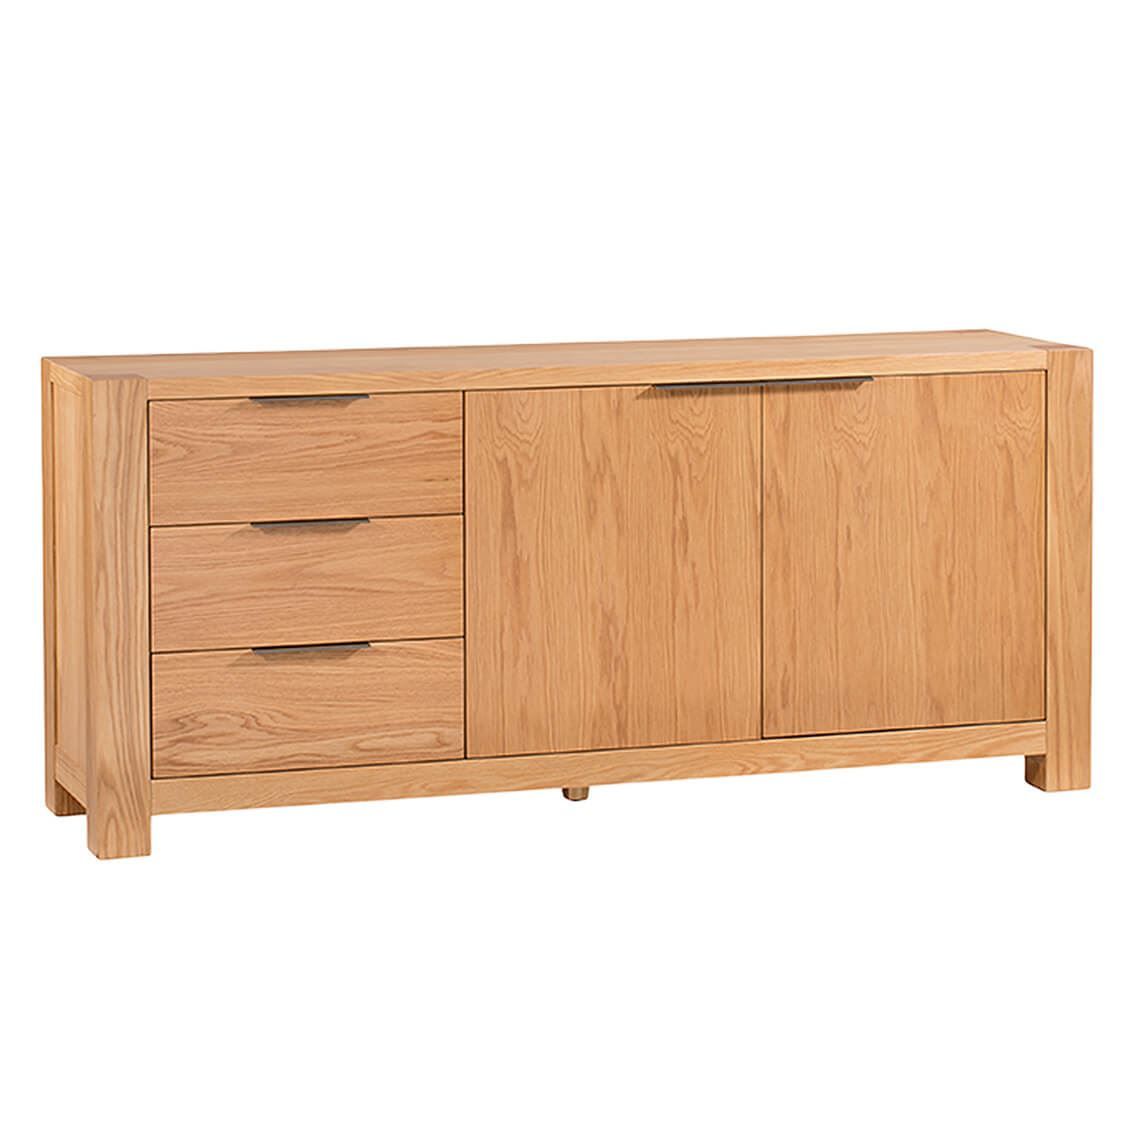 Titus 2 Door 3 Drawer Buffet, Natural Intended For 2 Door 3 Drawer Buffets (View 15 of 30)